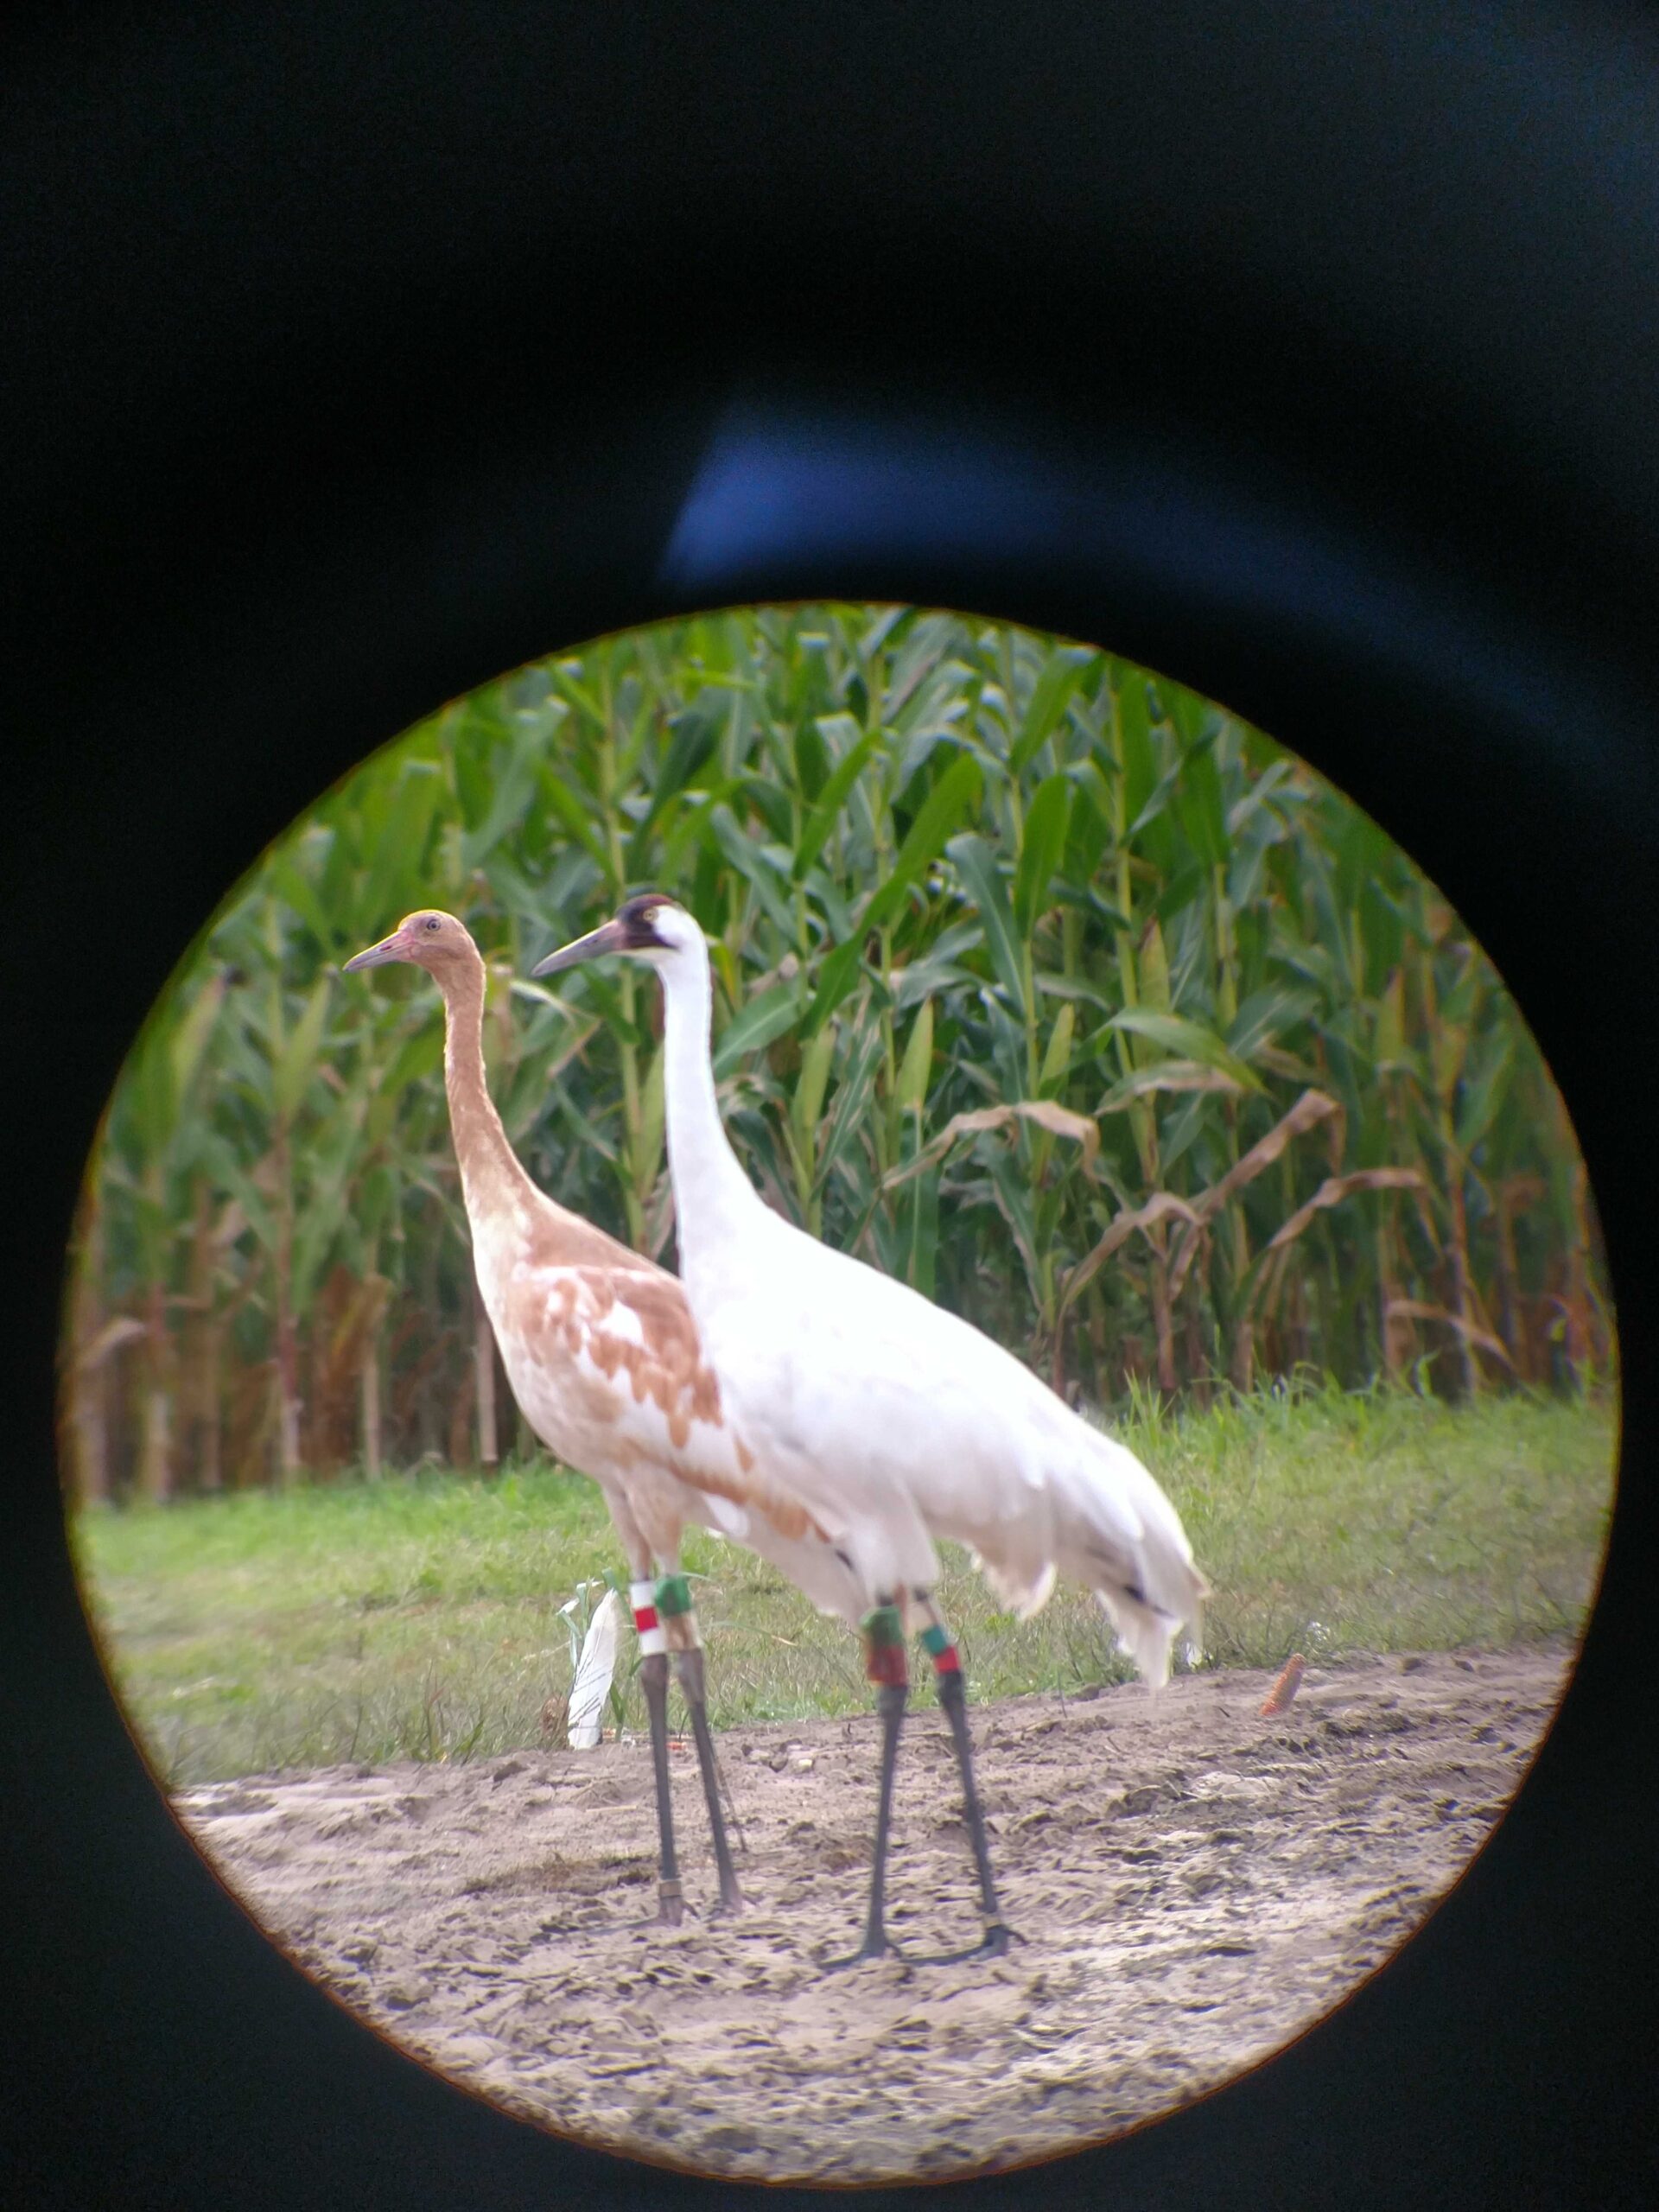 Photo taken through a scope of an adult and juvenile Whooping Crane